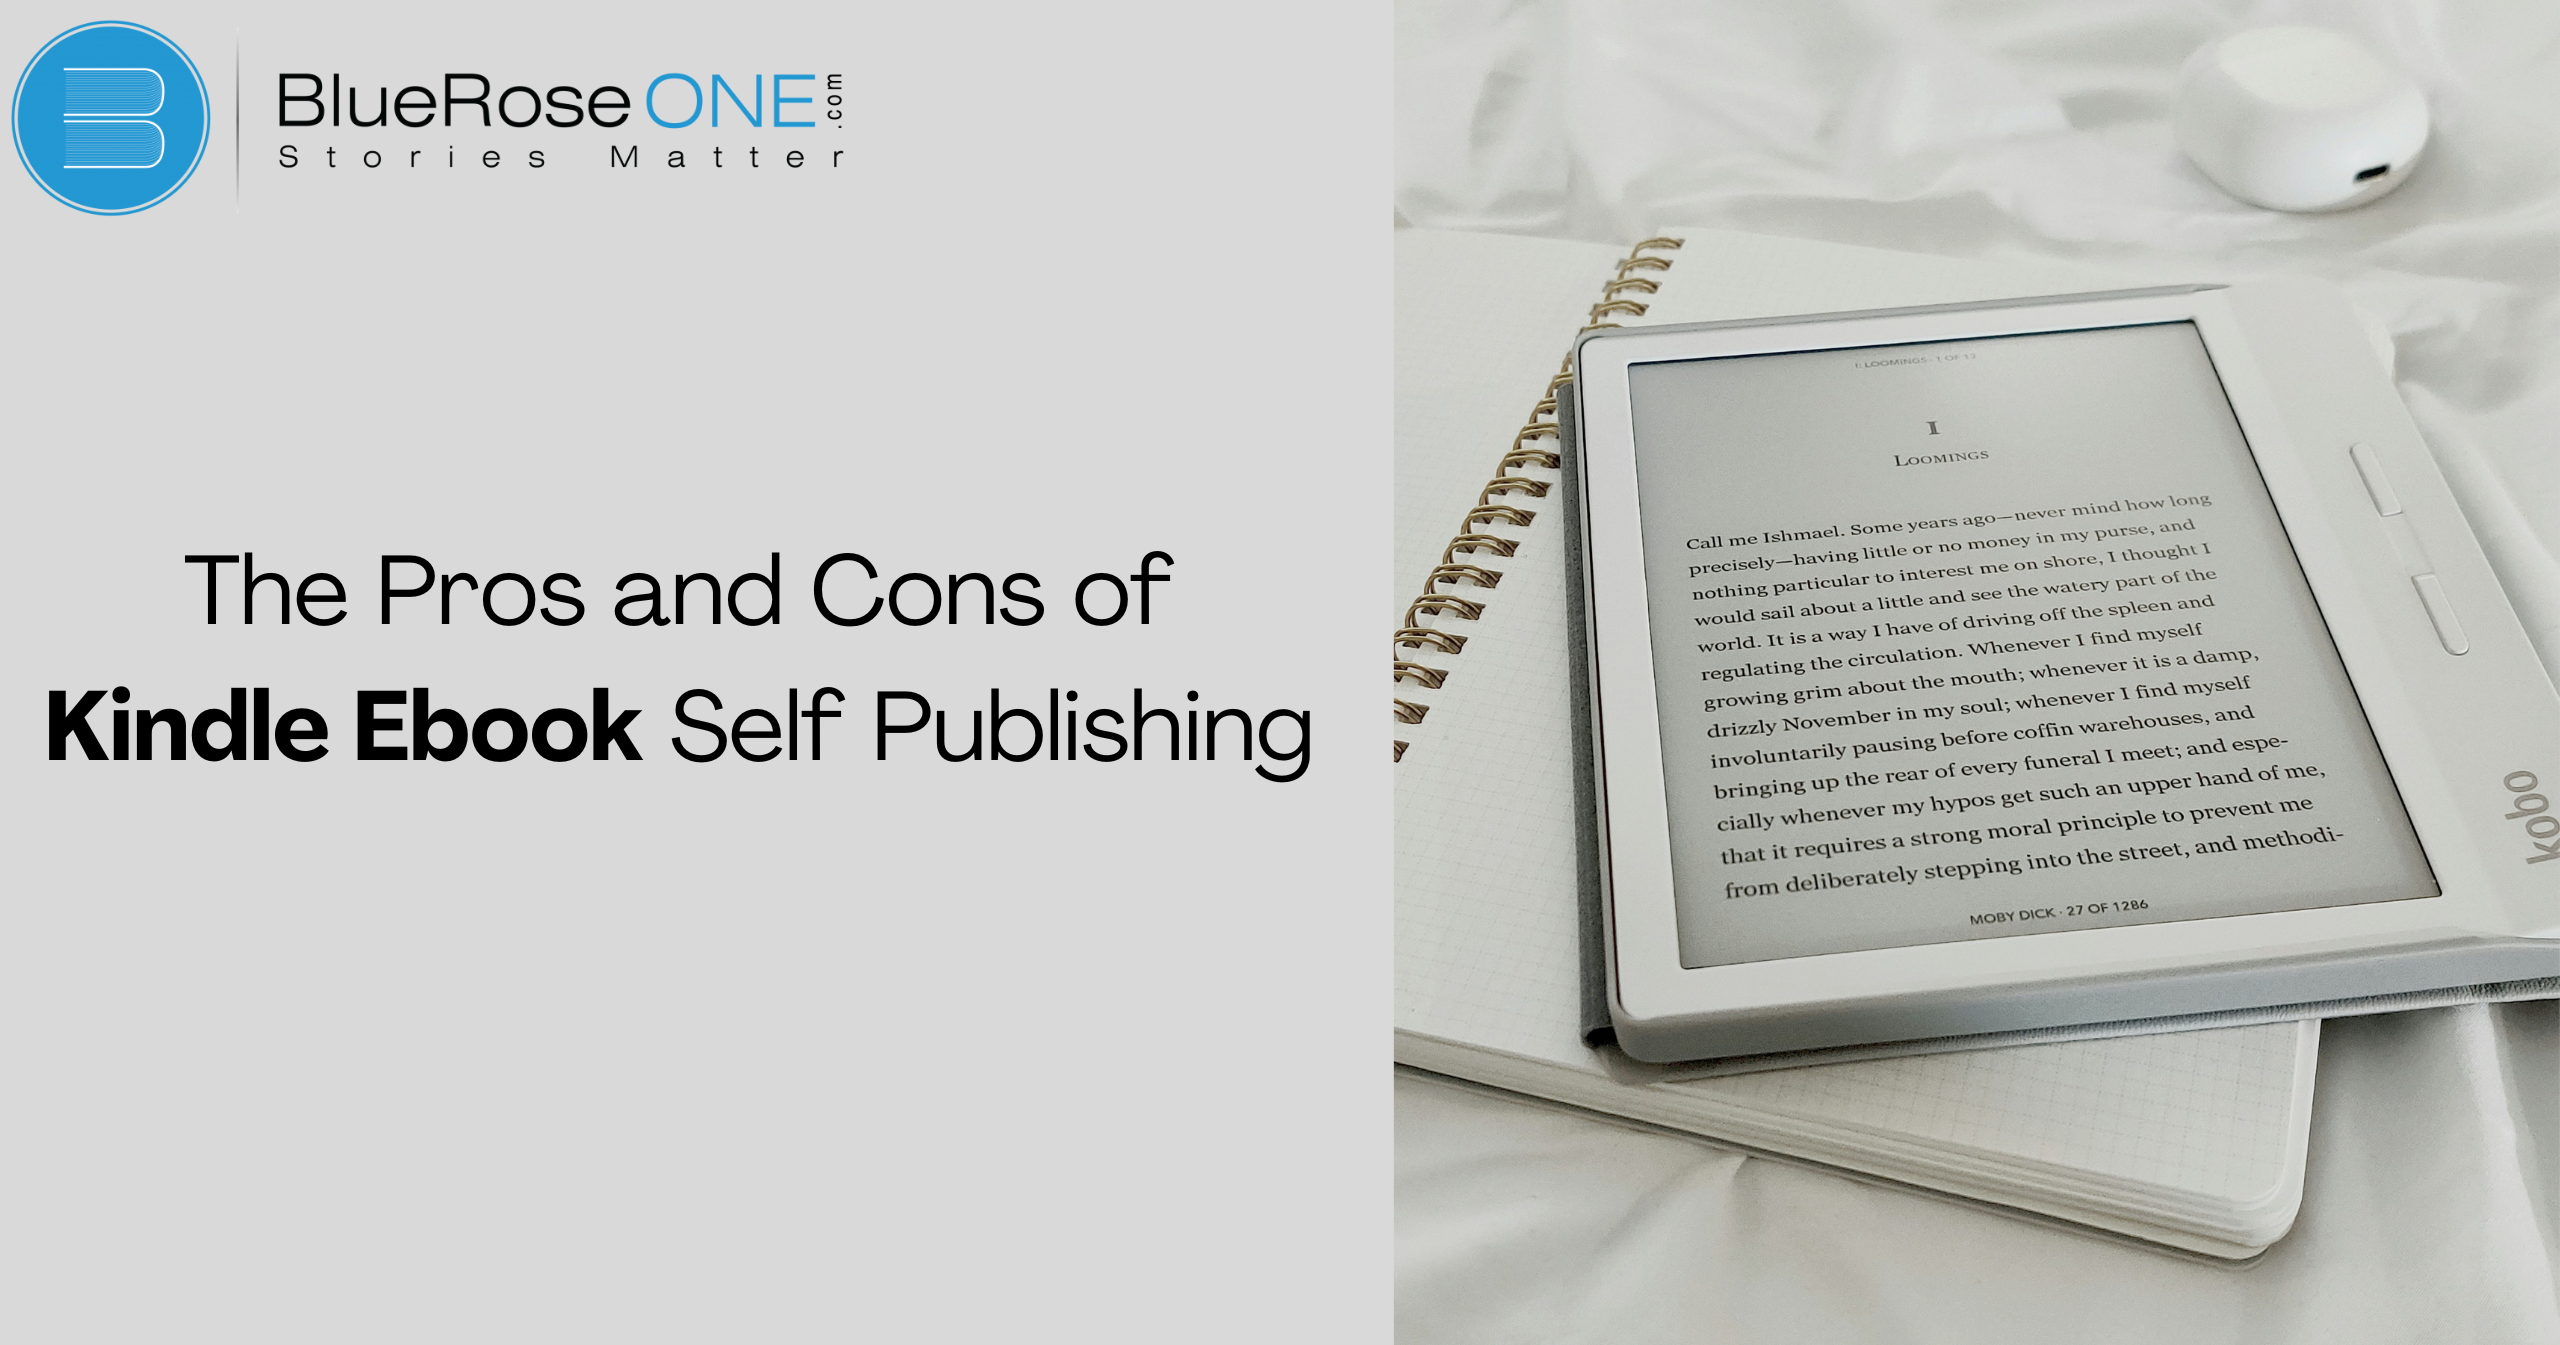 The Pros and Cons of Kindle Ebook Self Publishing